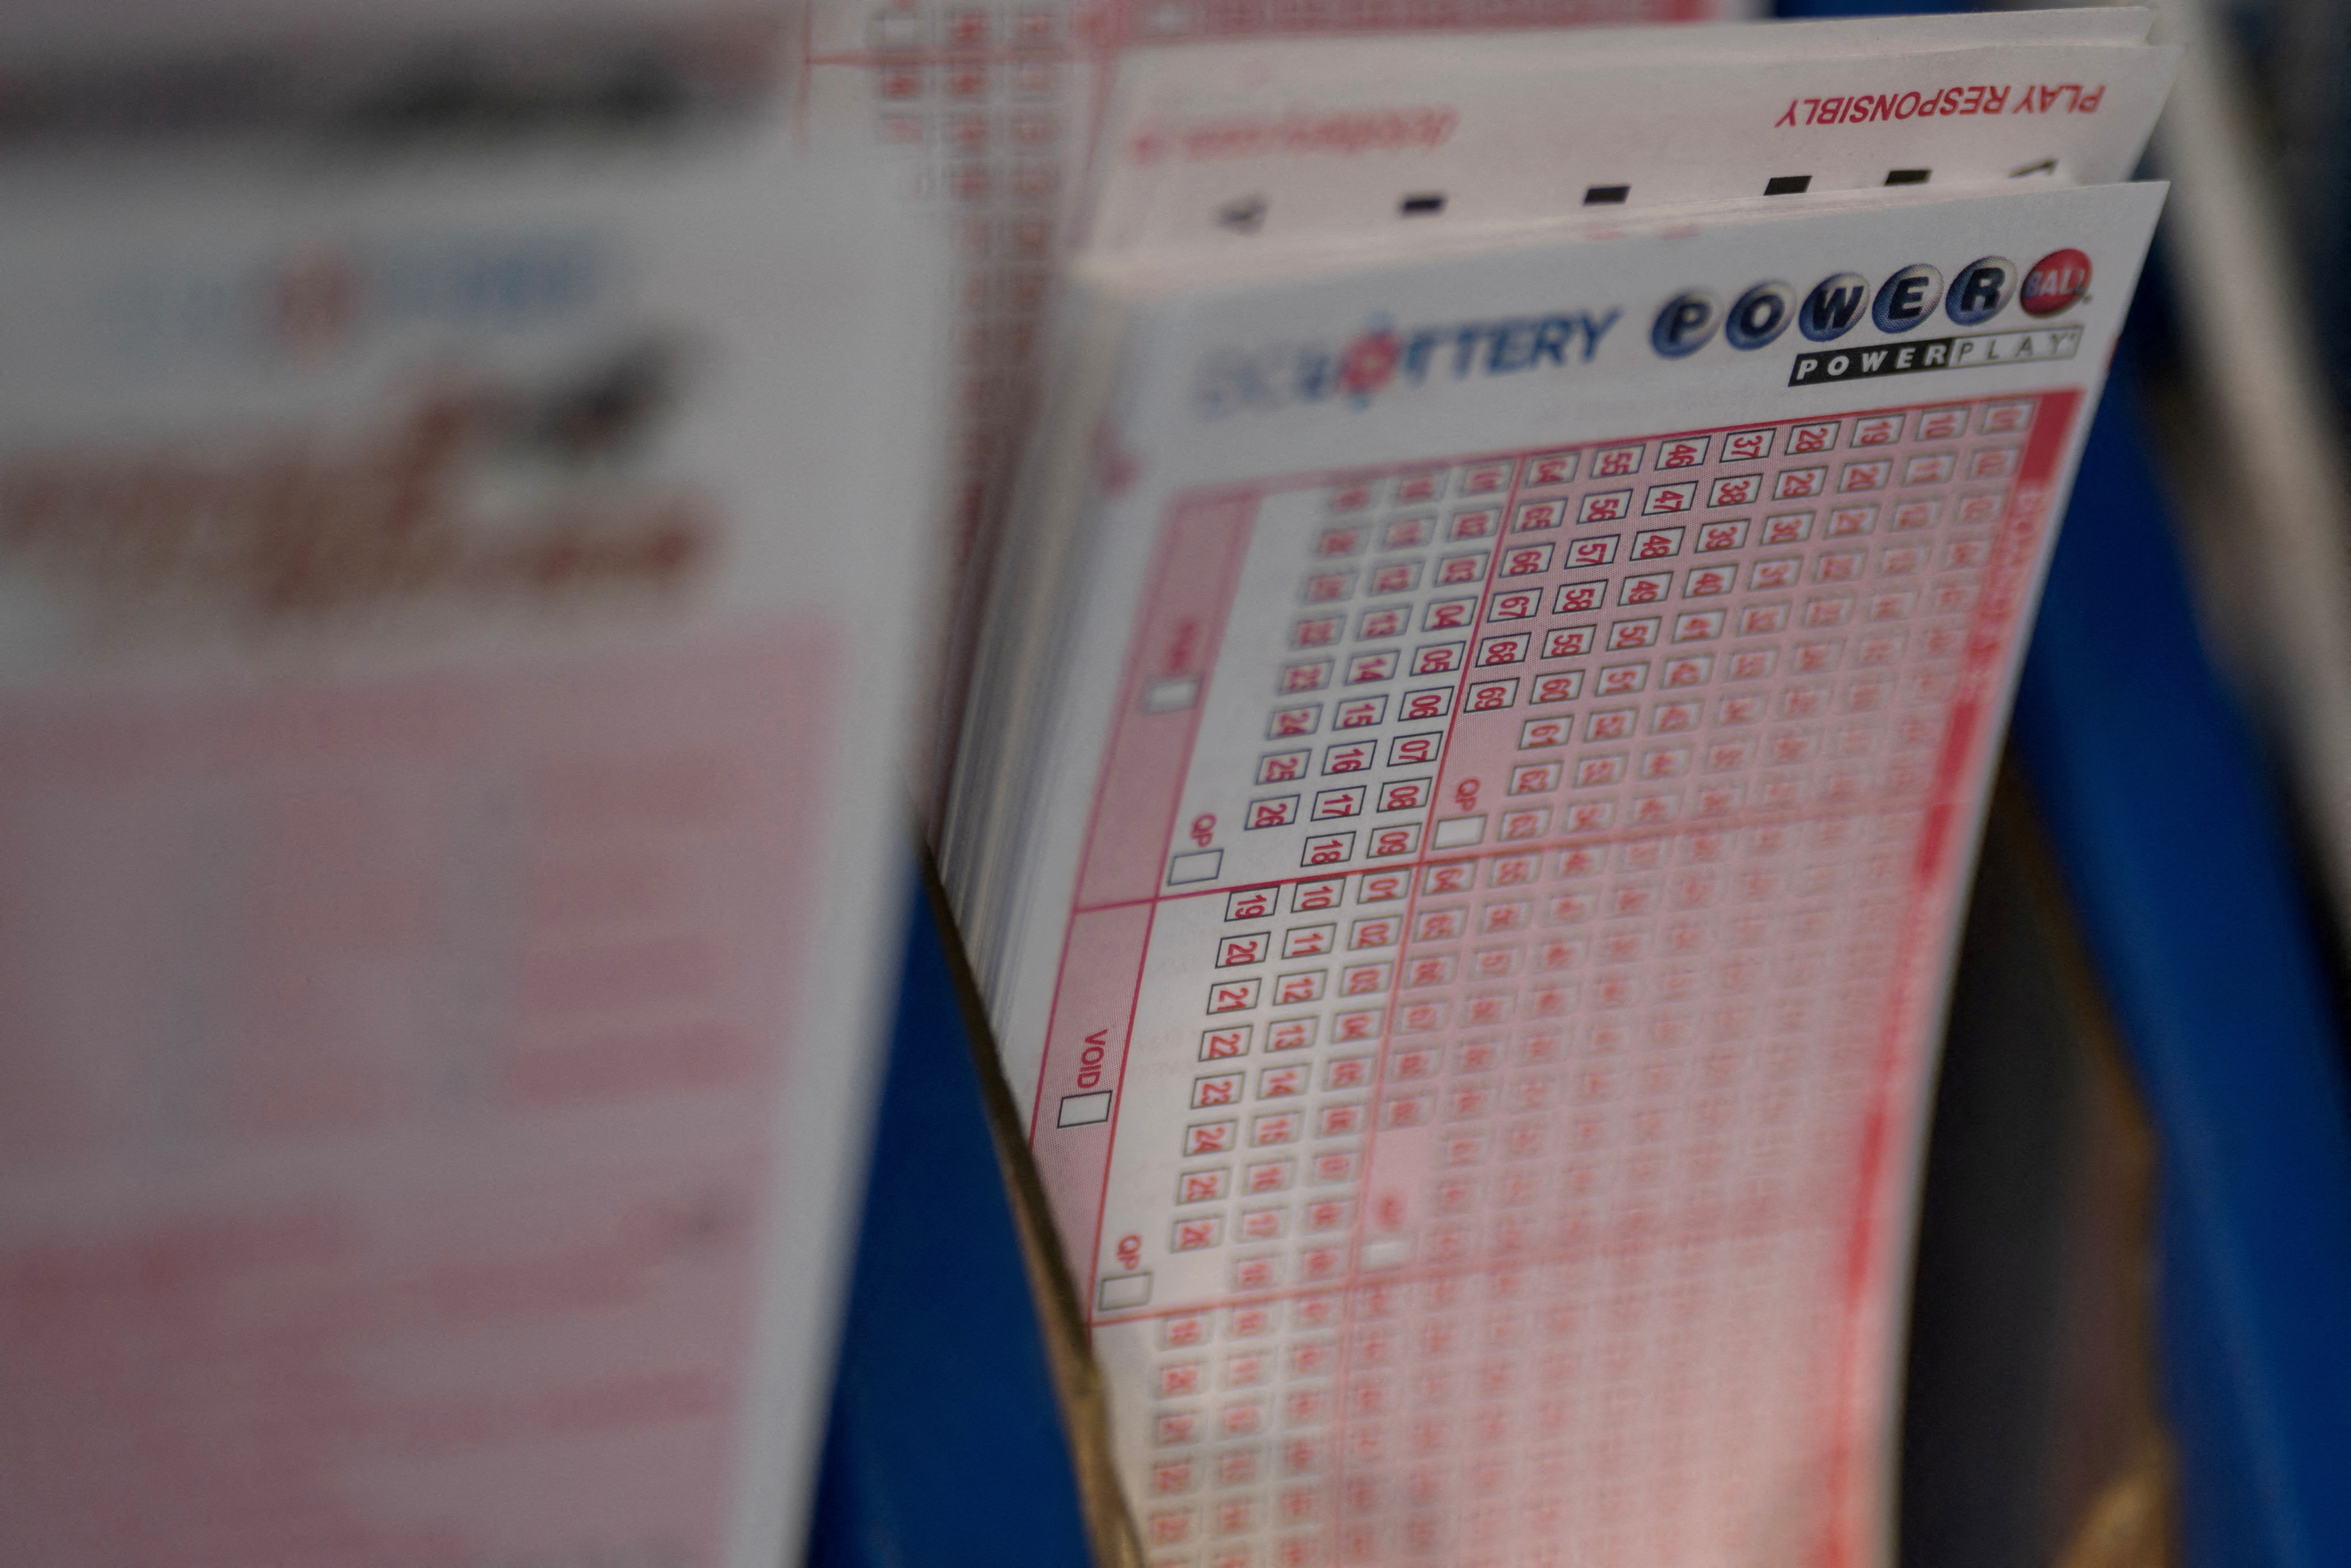 Powerball tickets are seen at a liquor store, in Washington